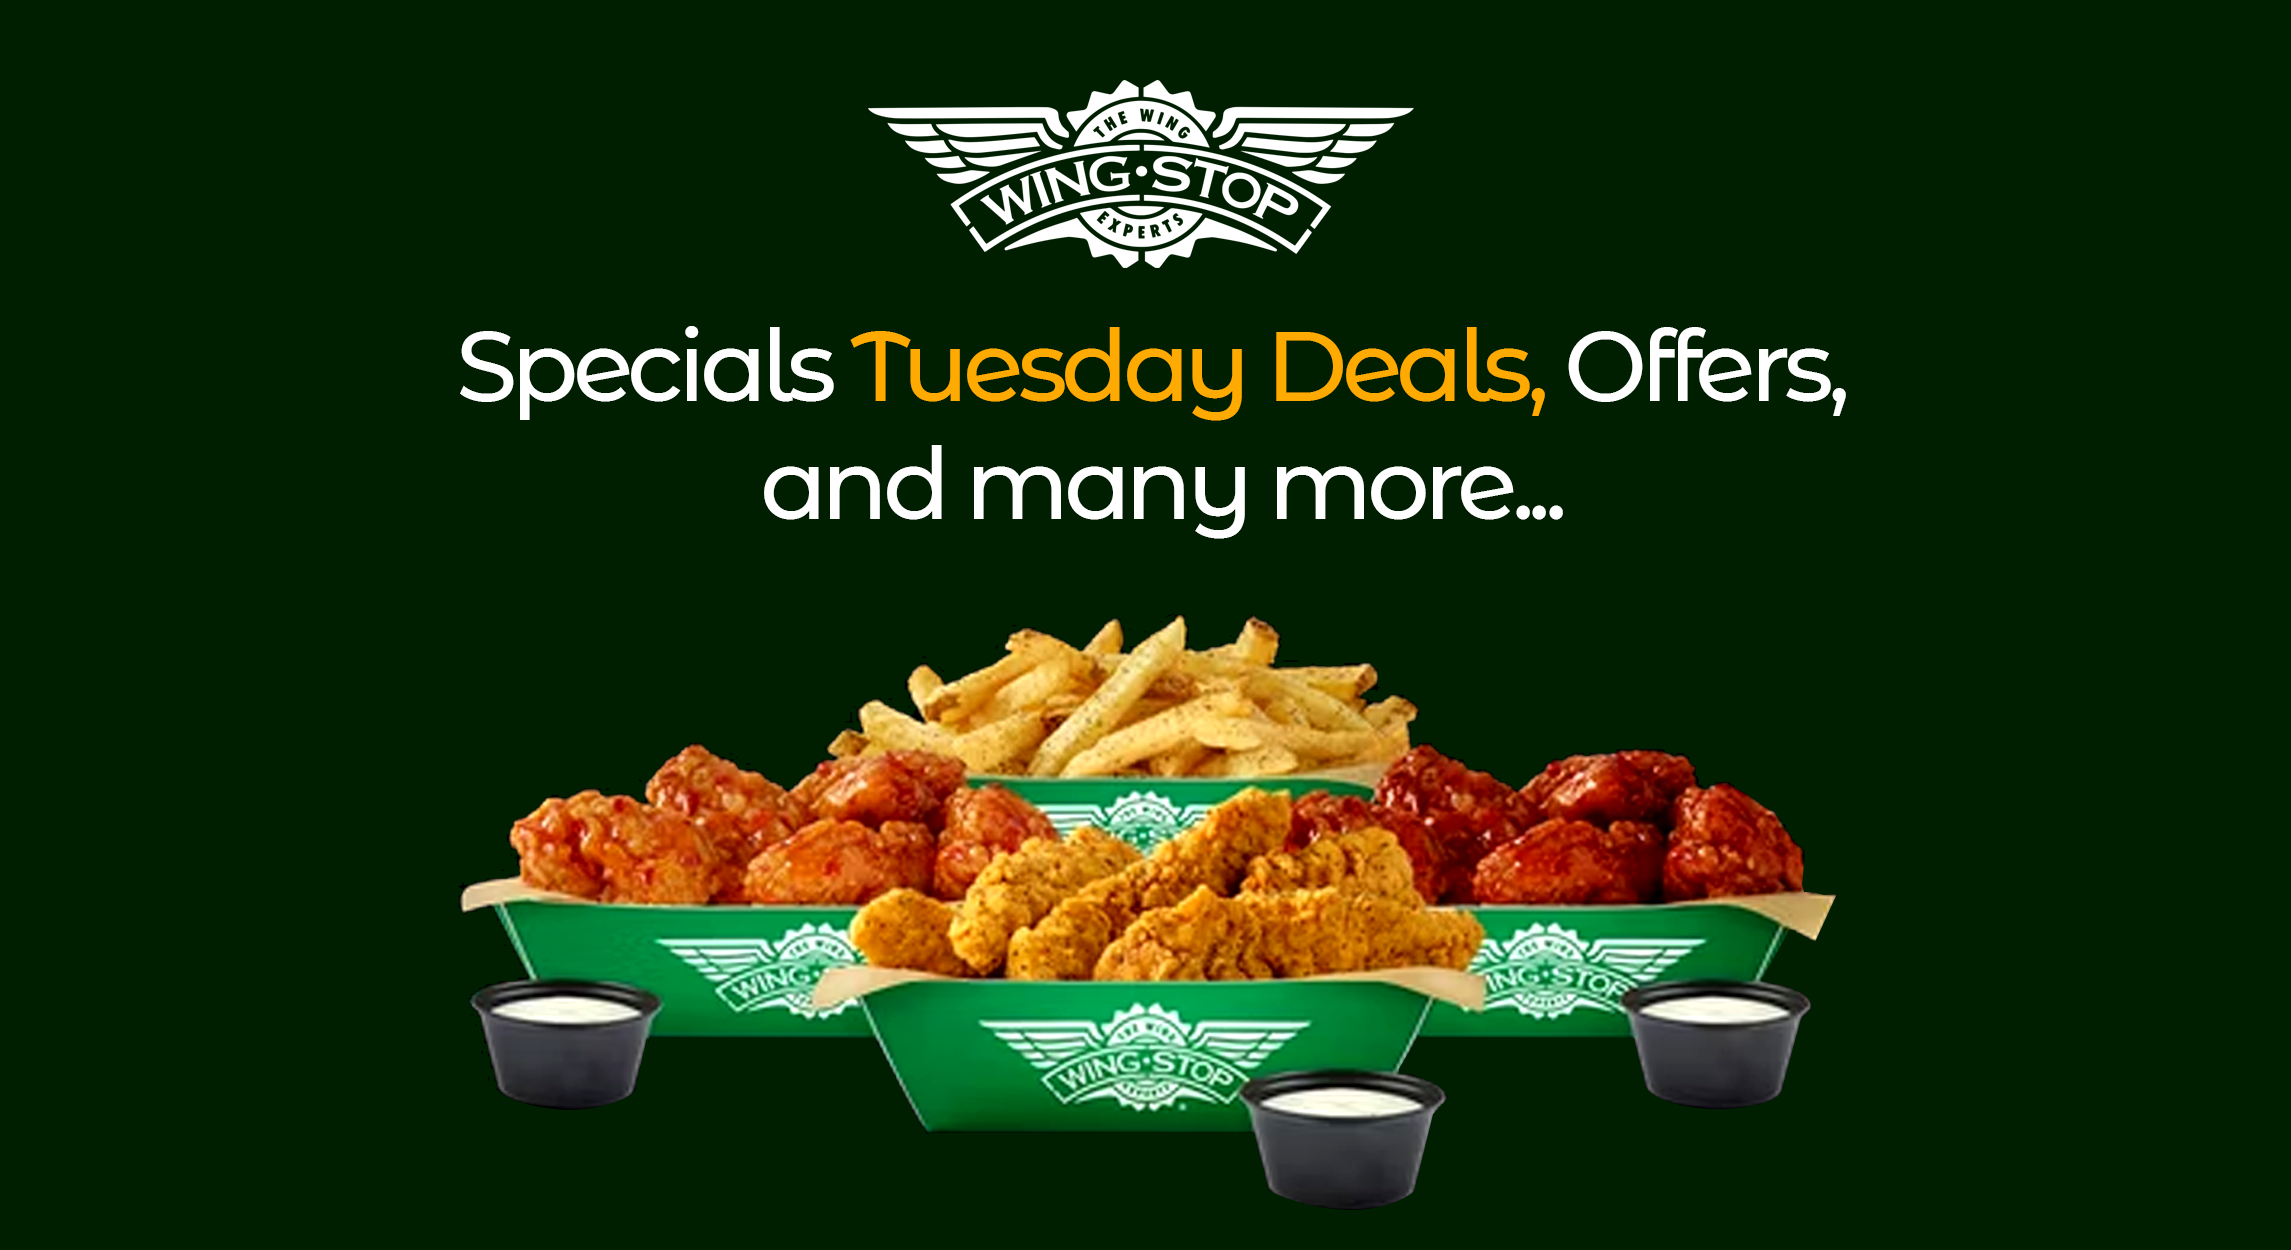 Wingstop Specials Tuesday Superb Wingstop Tuesday Deal